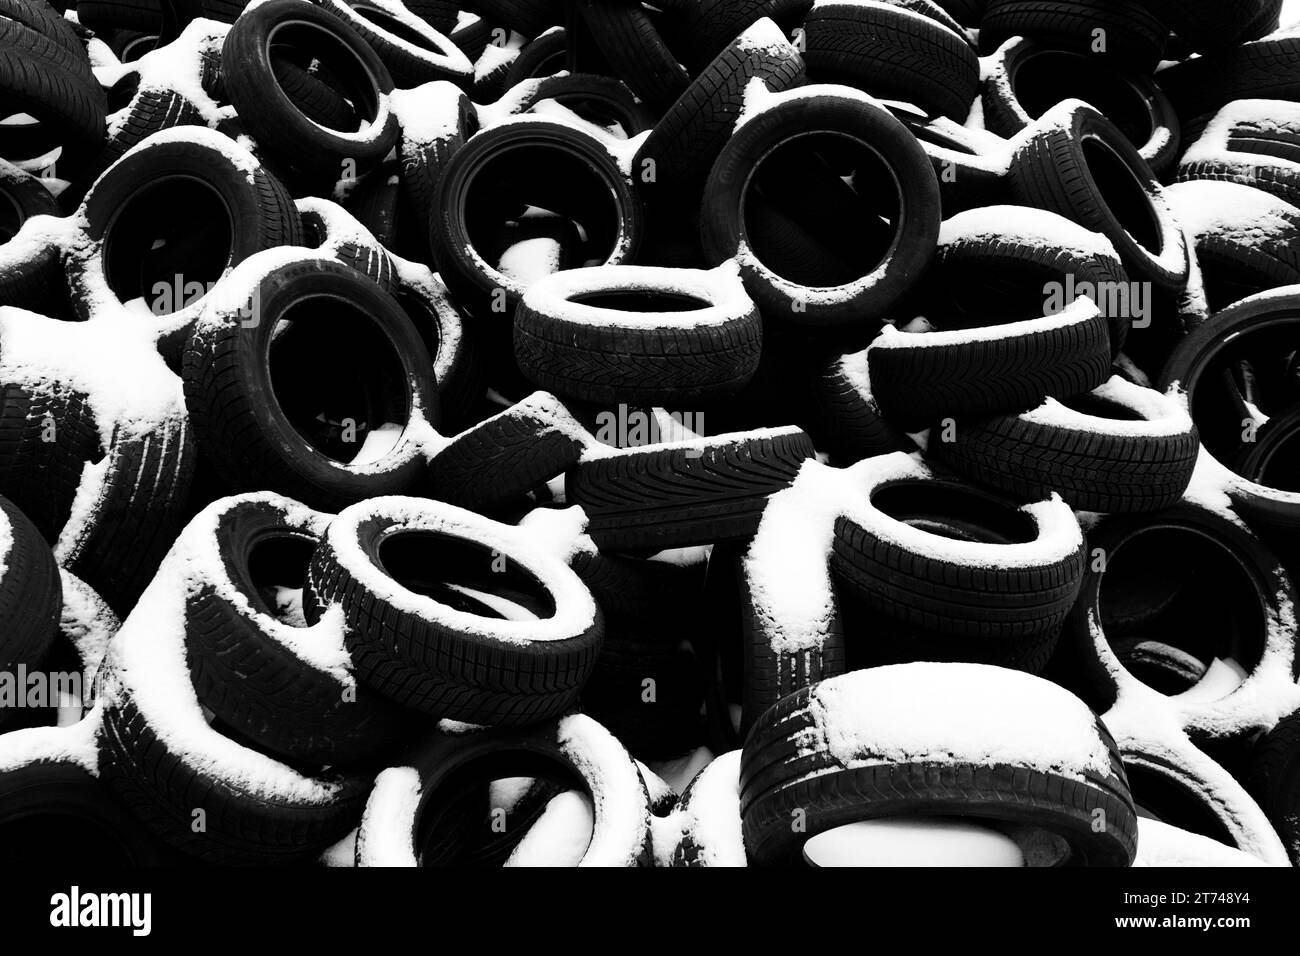 Pile of old tyres covered by snow. Black and white photography. Stock Photo